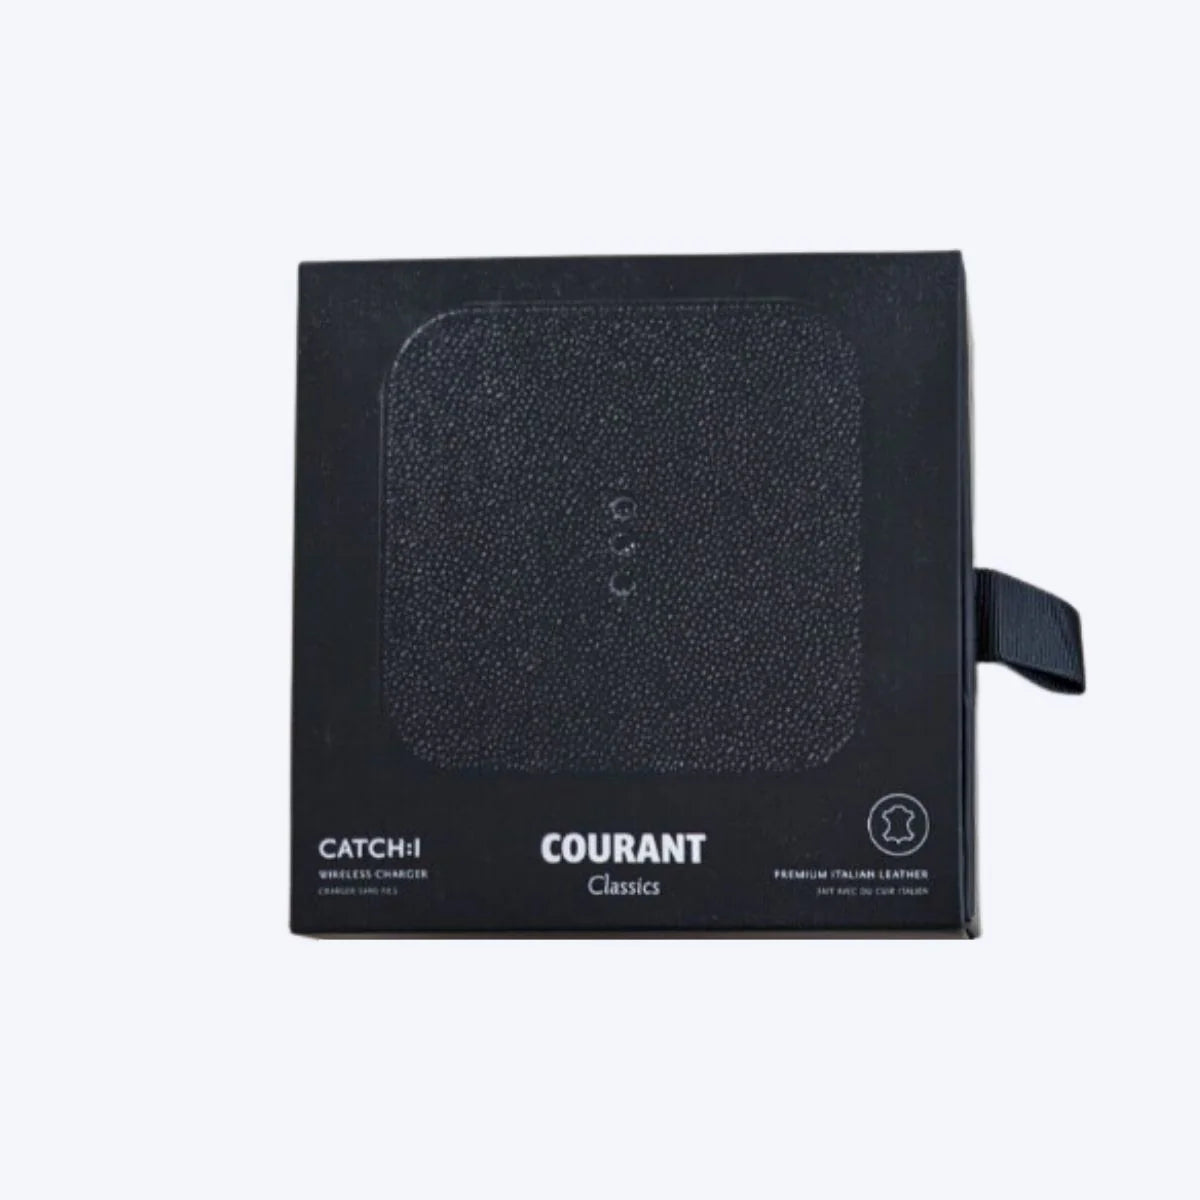 The Catch 1:1 Courant Classics Charger in black leather.